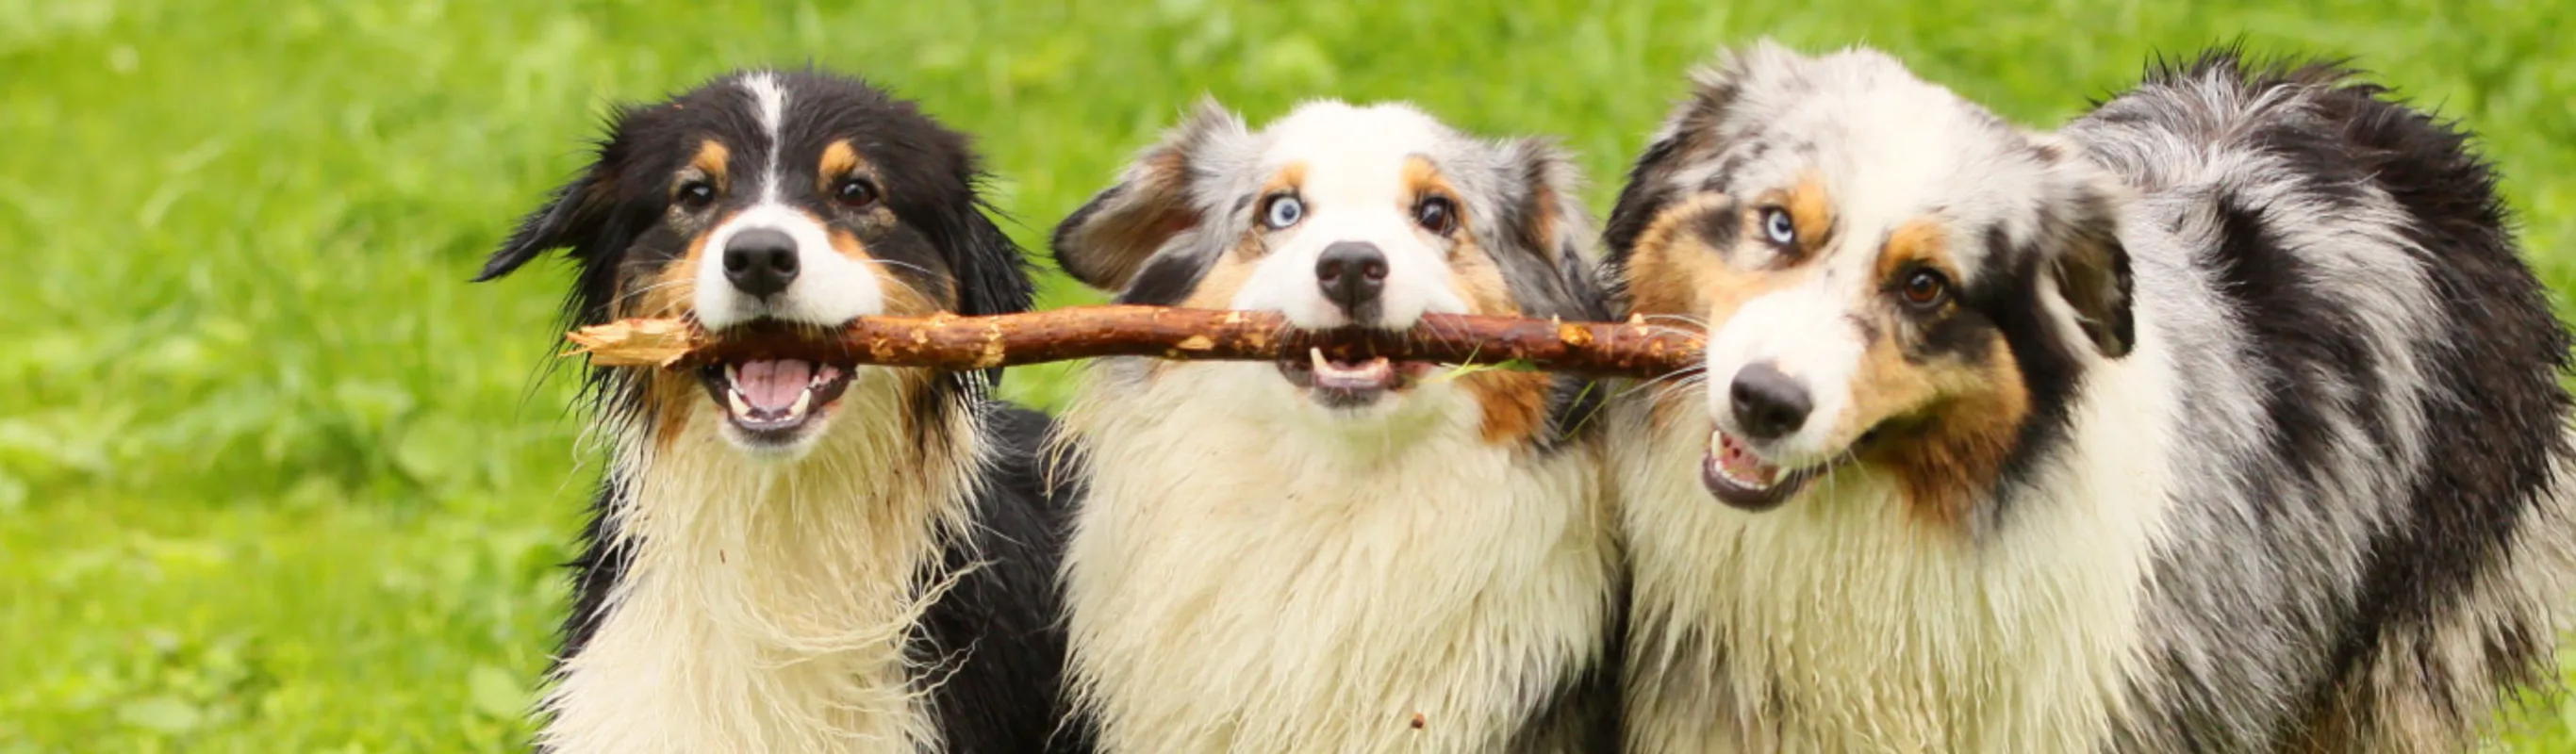 3 australian shepherd dogs carrying a big stick together